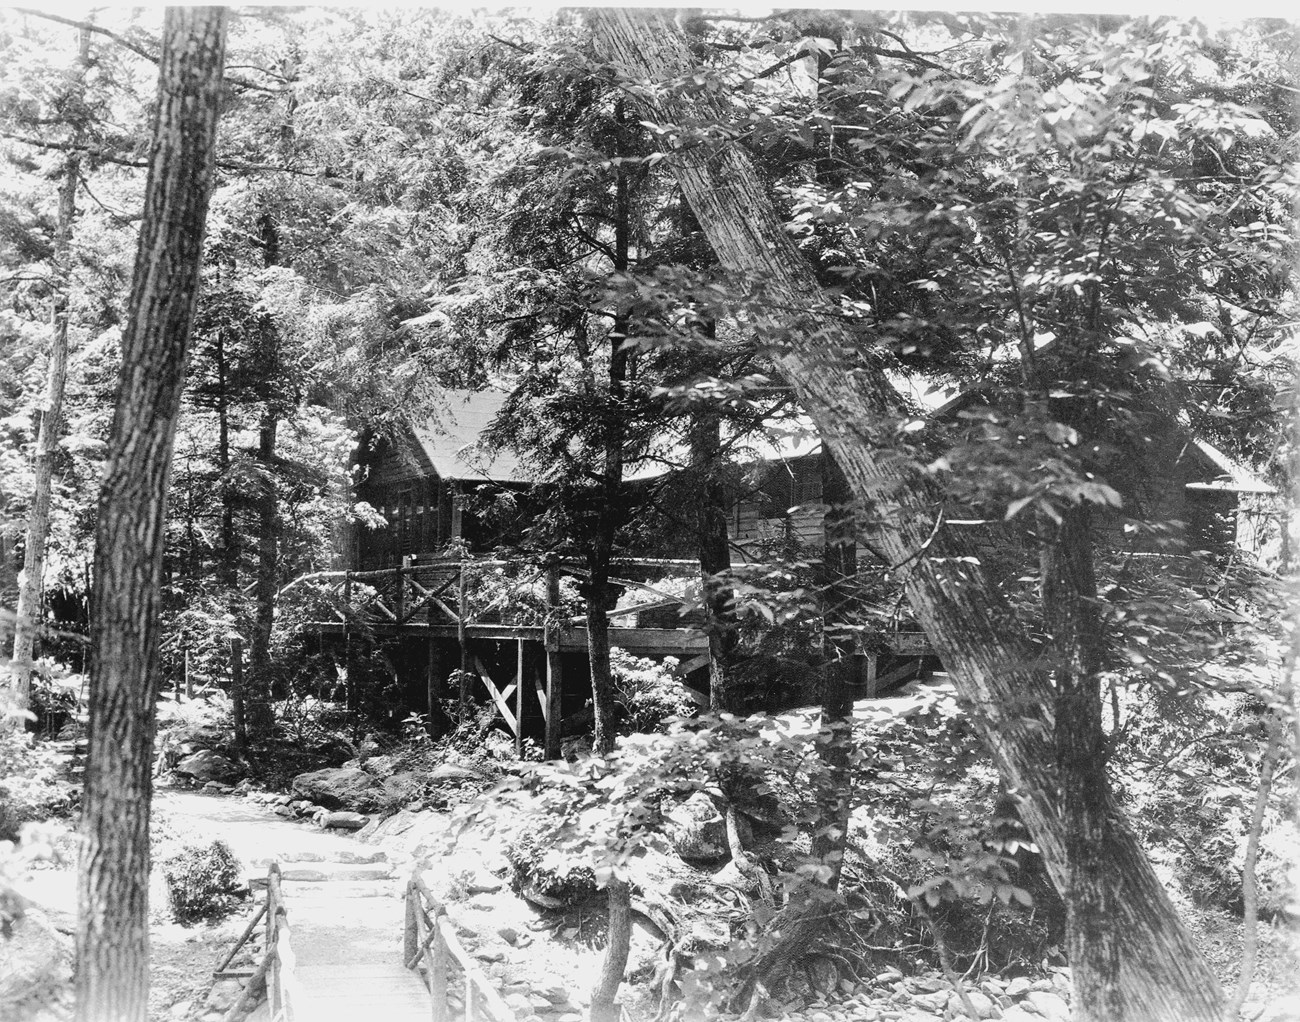 A footbridge leads to a rustic wooden cabin in the woods, showing the hemlock canopy and ferns during the historic period